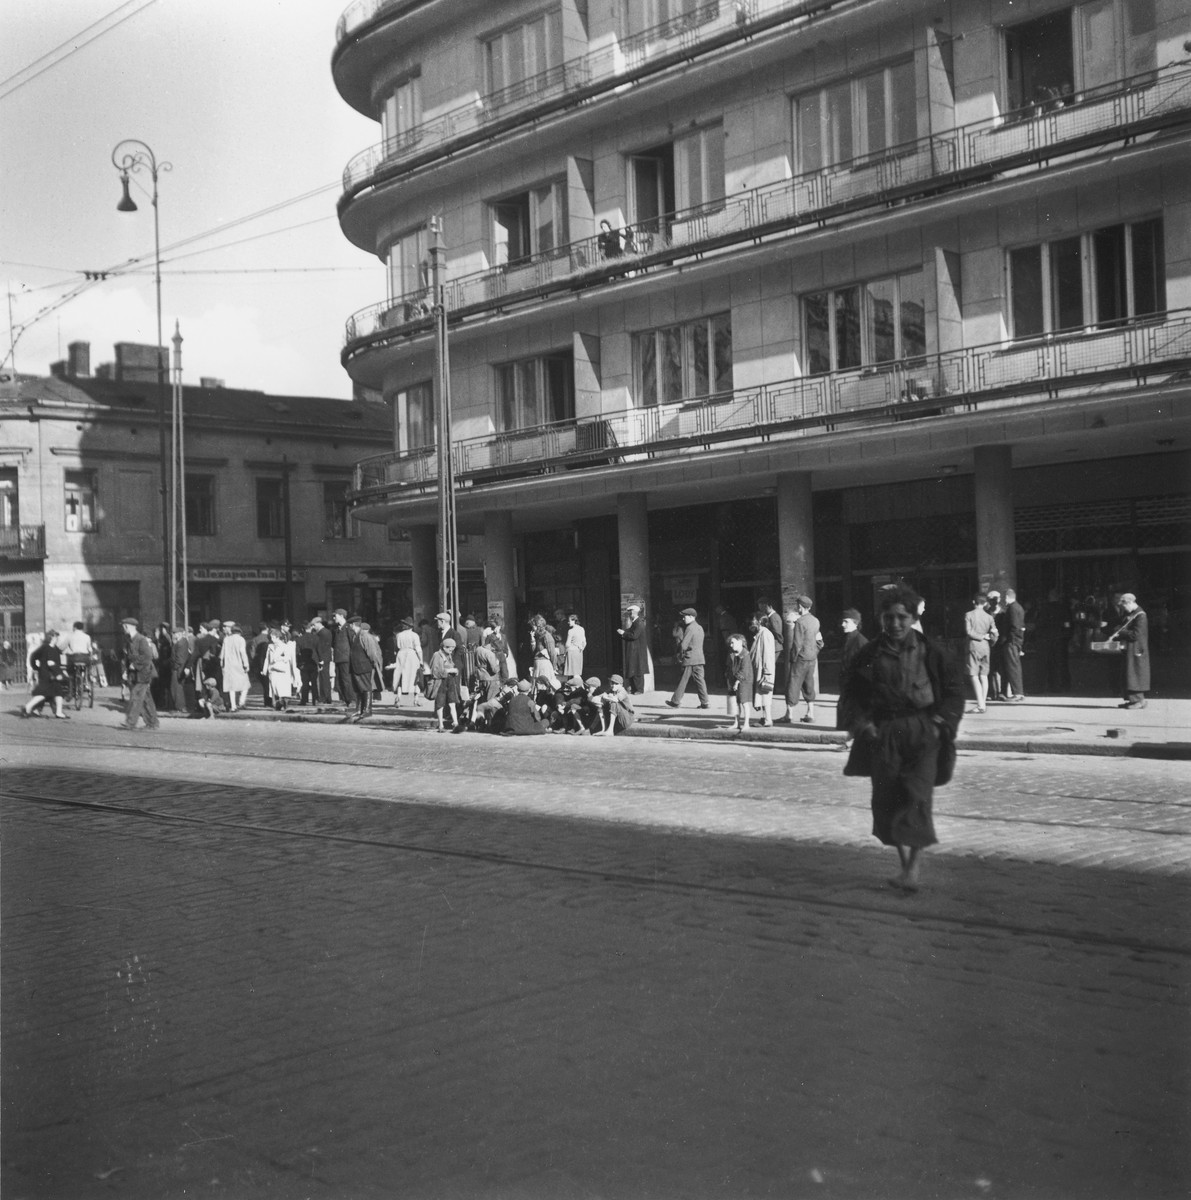 Street scene in the Warsaw ghetto.

Joest's original caption reads: "The same house.  I asked myself: What are all these people waiting for?  They couldn't be waiting for the streetcar; it didn't stop in the Ghetto.  And everywhere countless children without shoes."